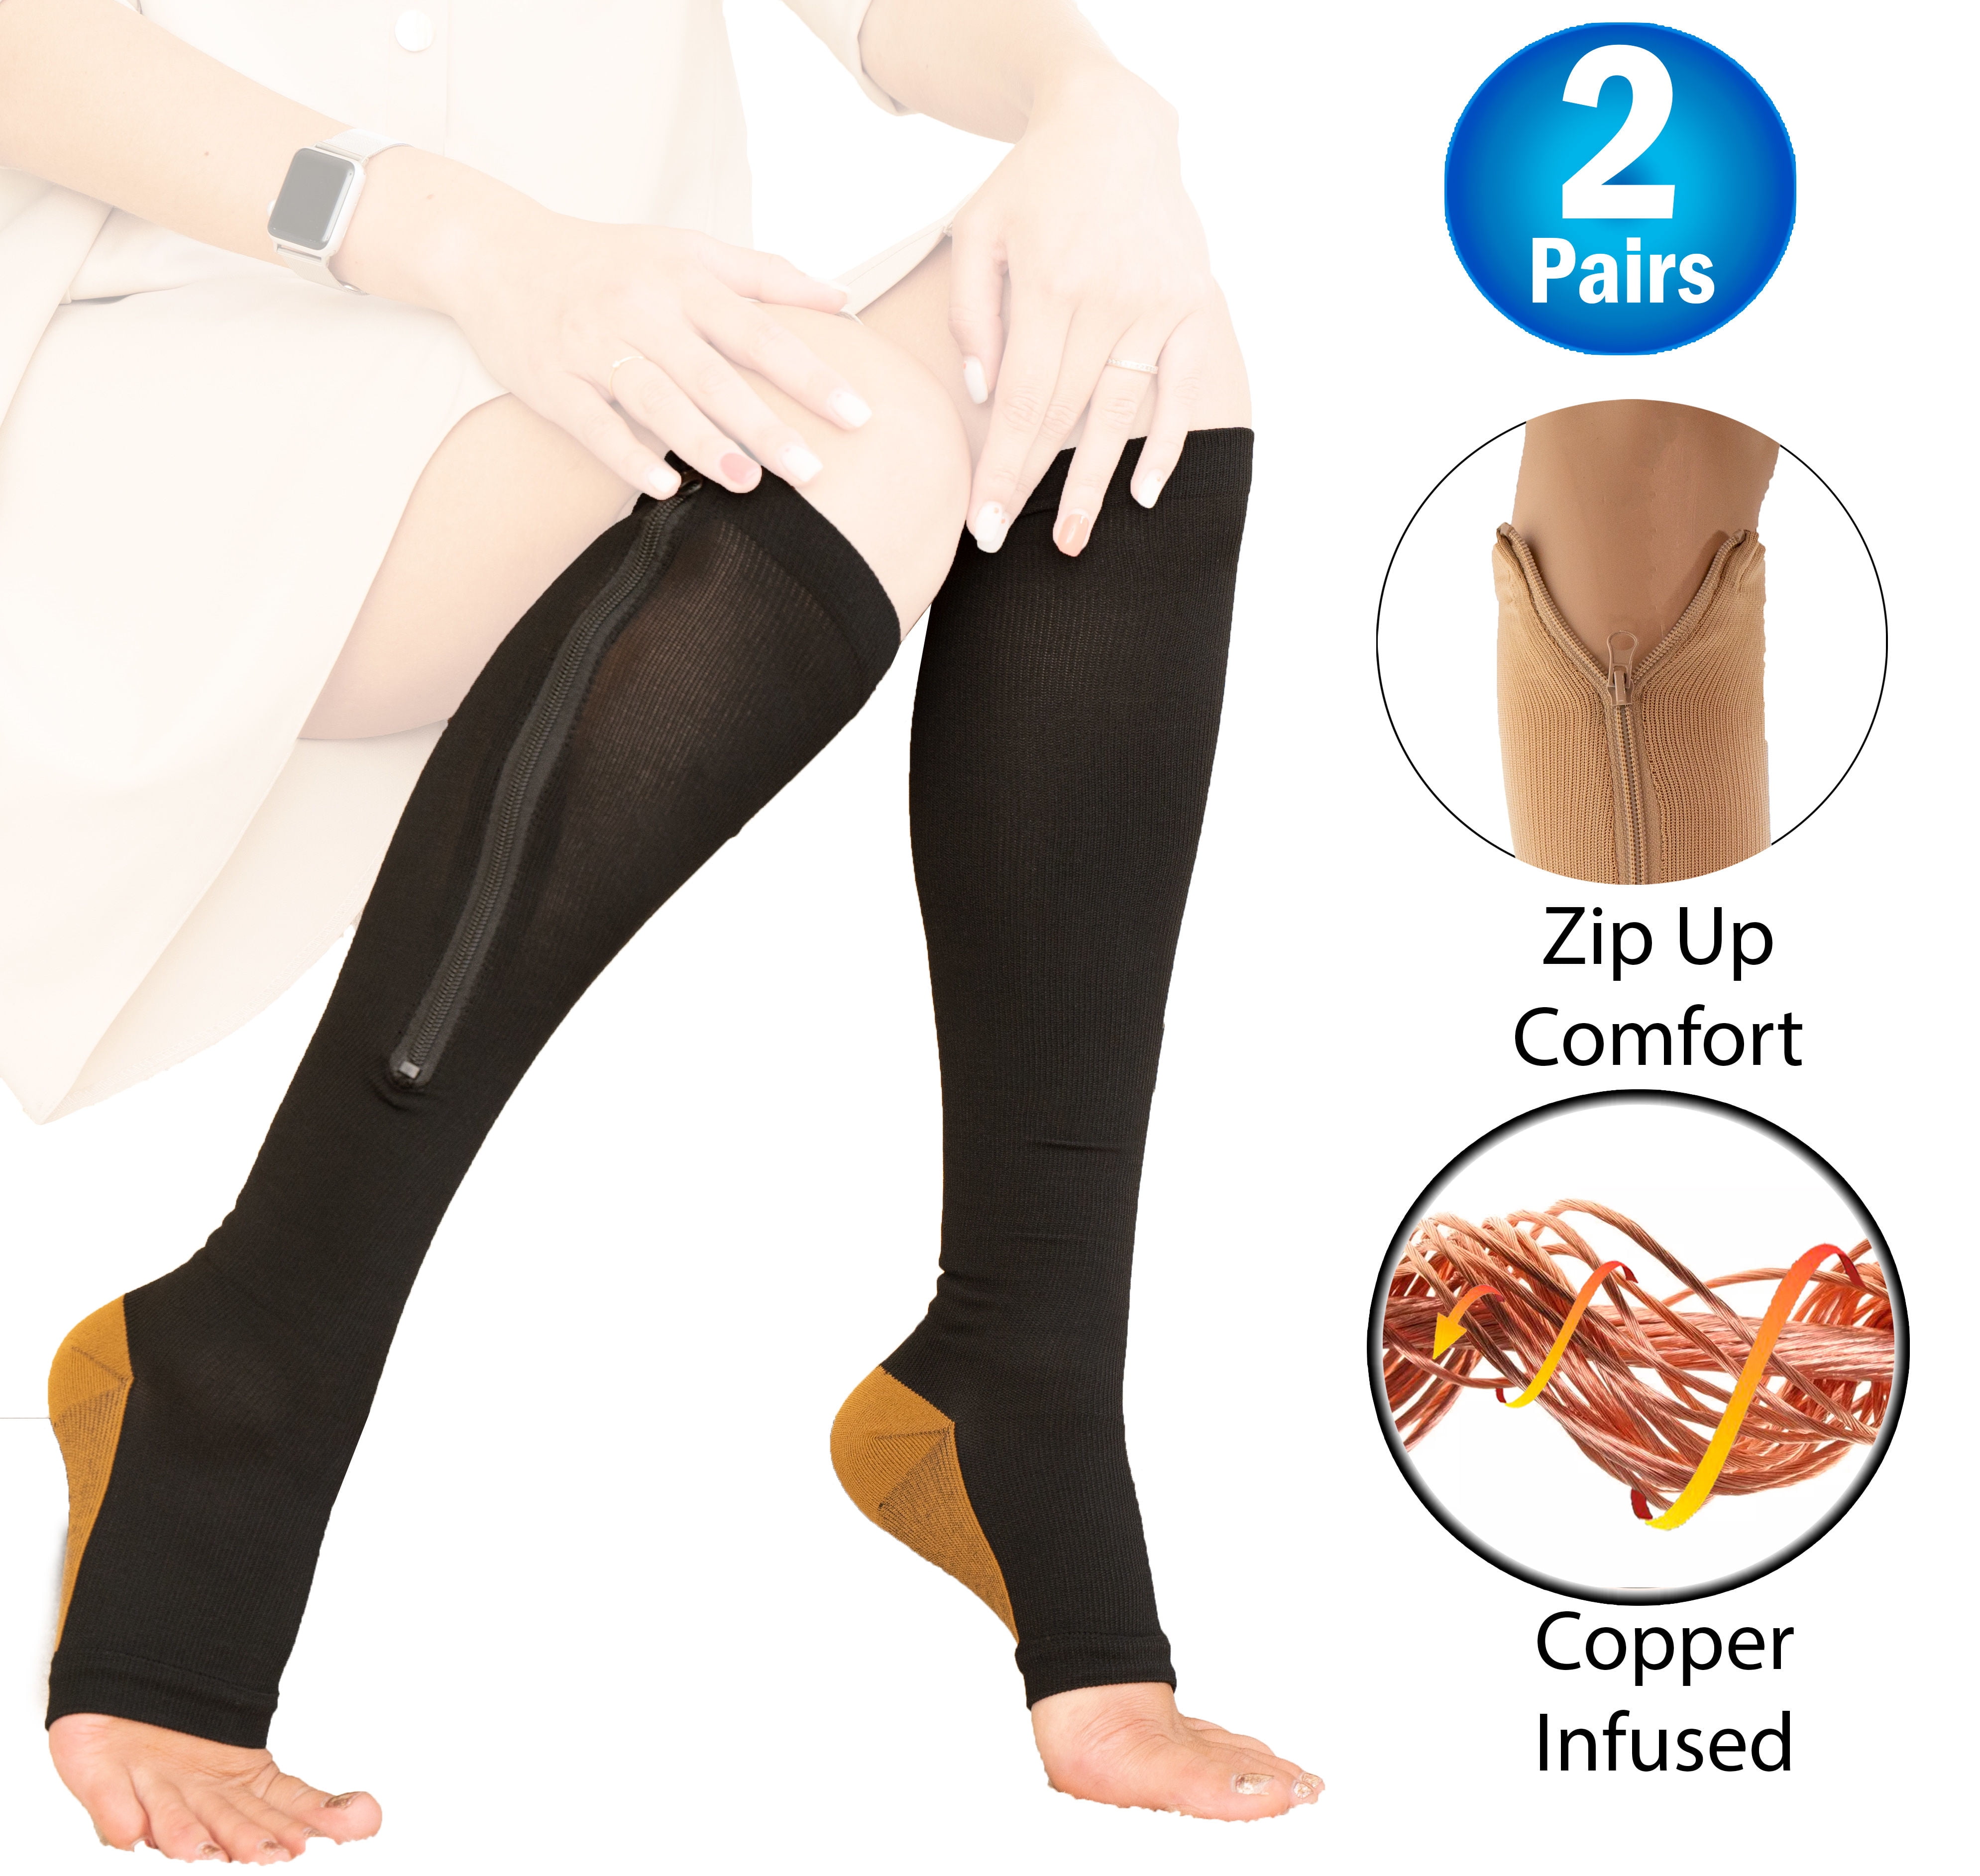 2 Copper Zipper Compression Socks w/ Open Toe Knee High Support Stockings -  Soft, Breathable Compression Socks For Support, Reduce Swelling & Better  Circulation - Black 2X-Large 